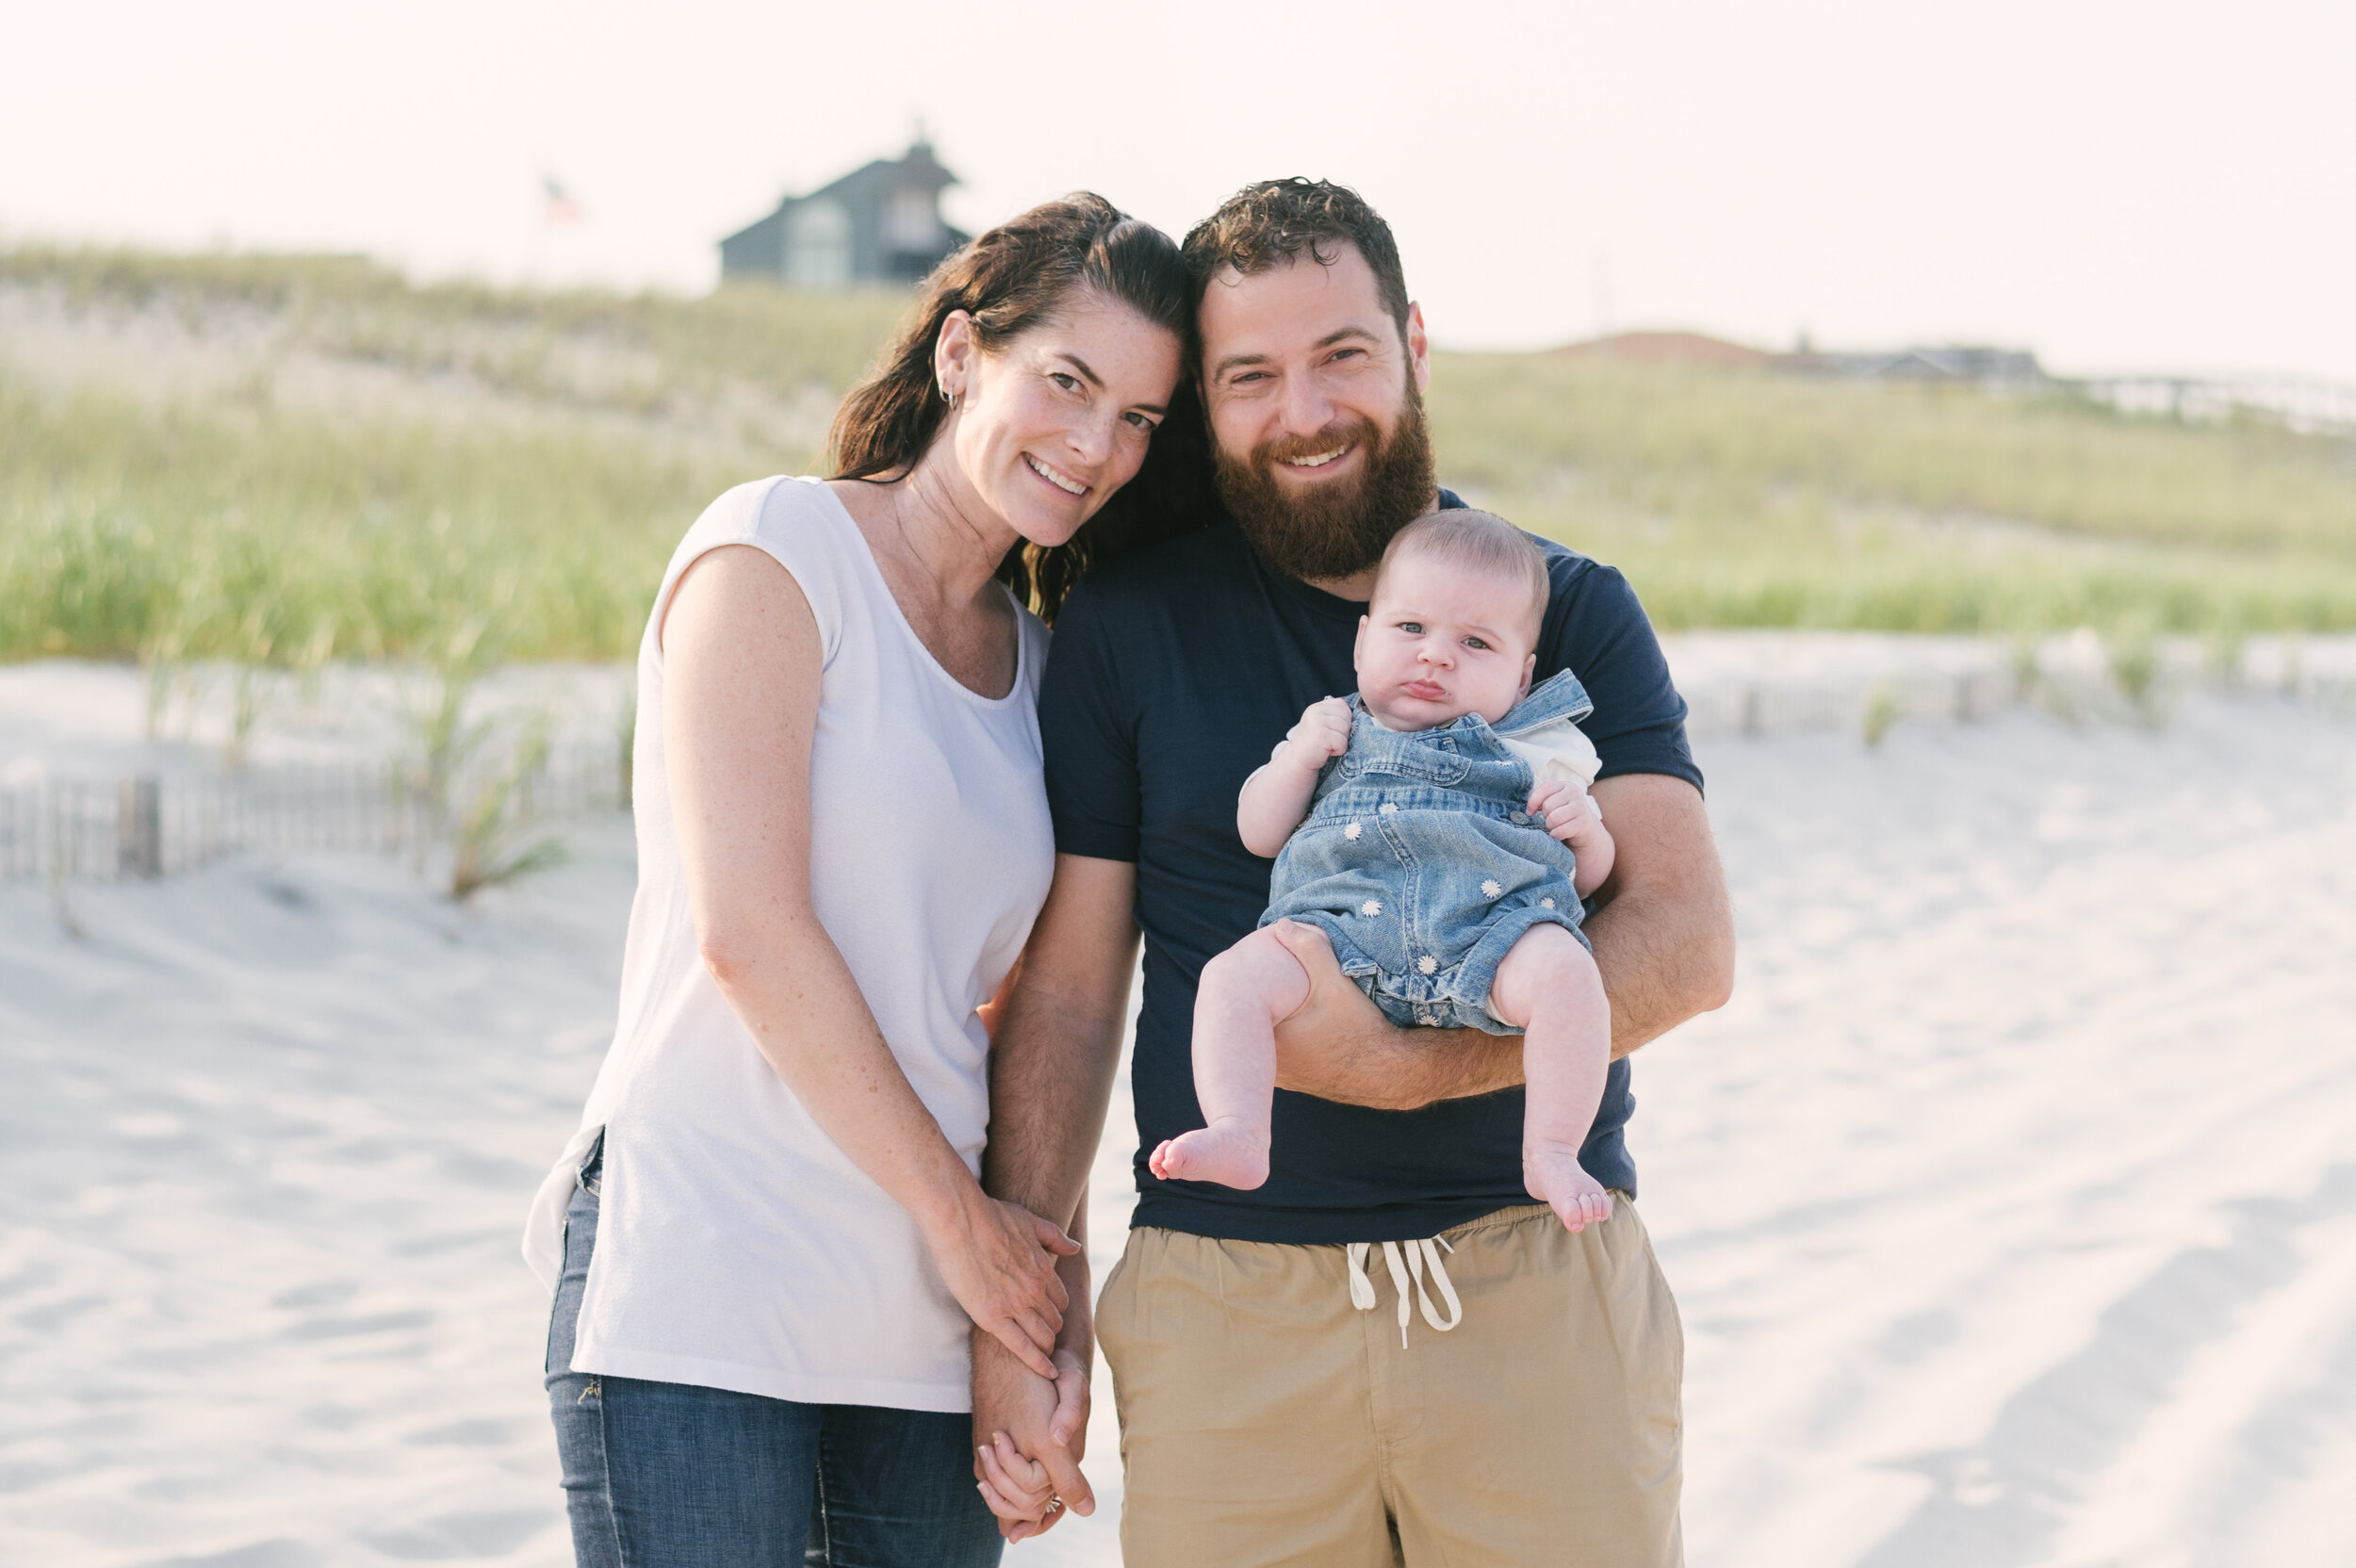 Mom, dad, and baby standing on beach during family beach photos  | NKB Photo